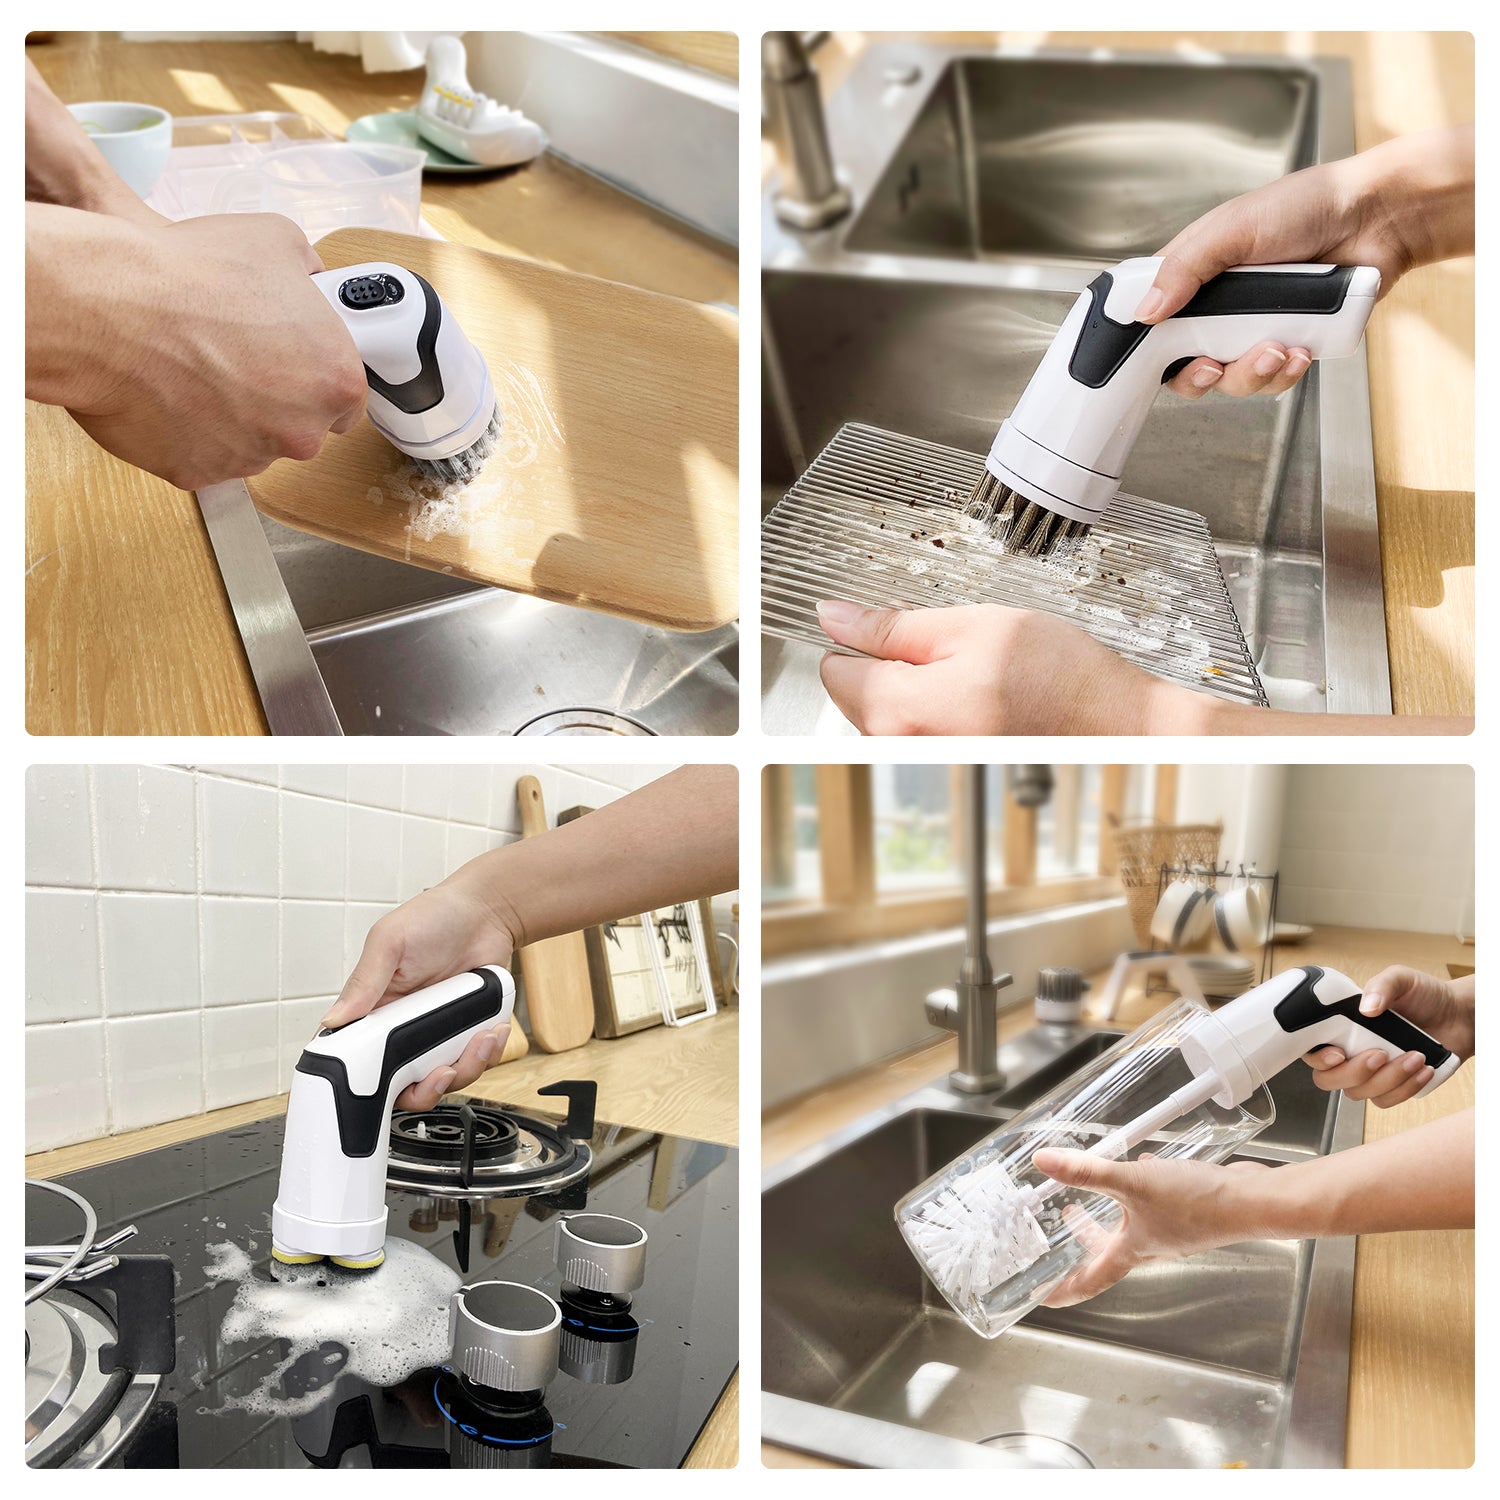 Goodpapa K1 4-in-1 All Purpose Spin Scrubber review - a different spin on  kitchen cleaning - The Gadgeteer